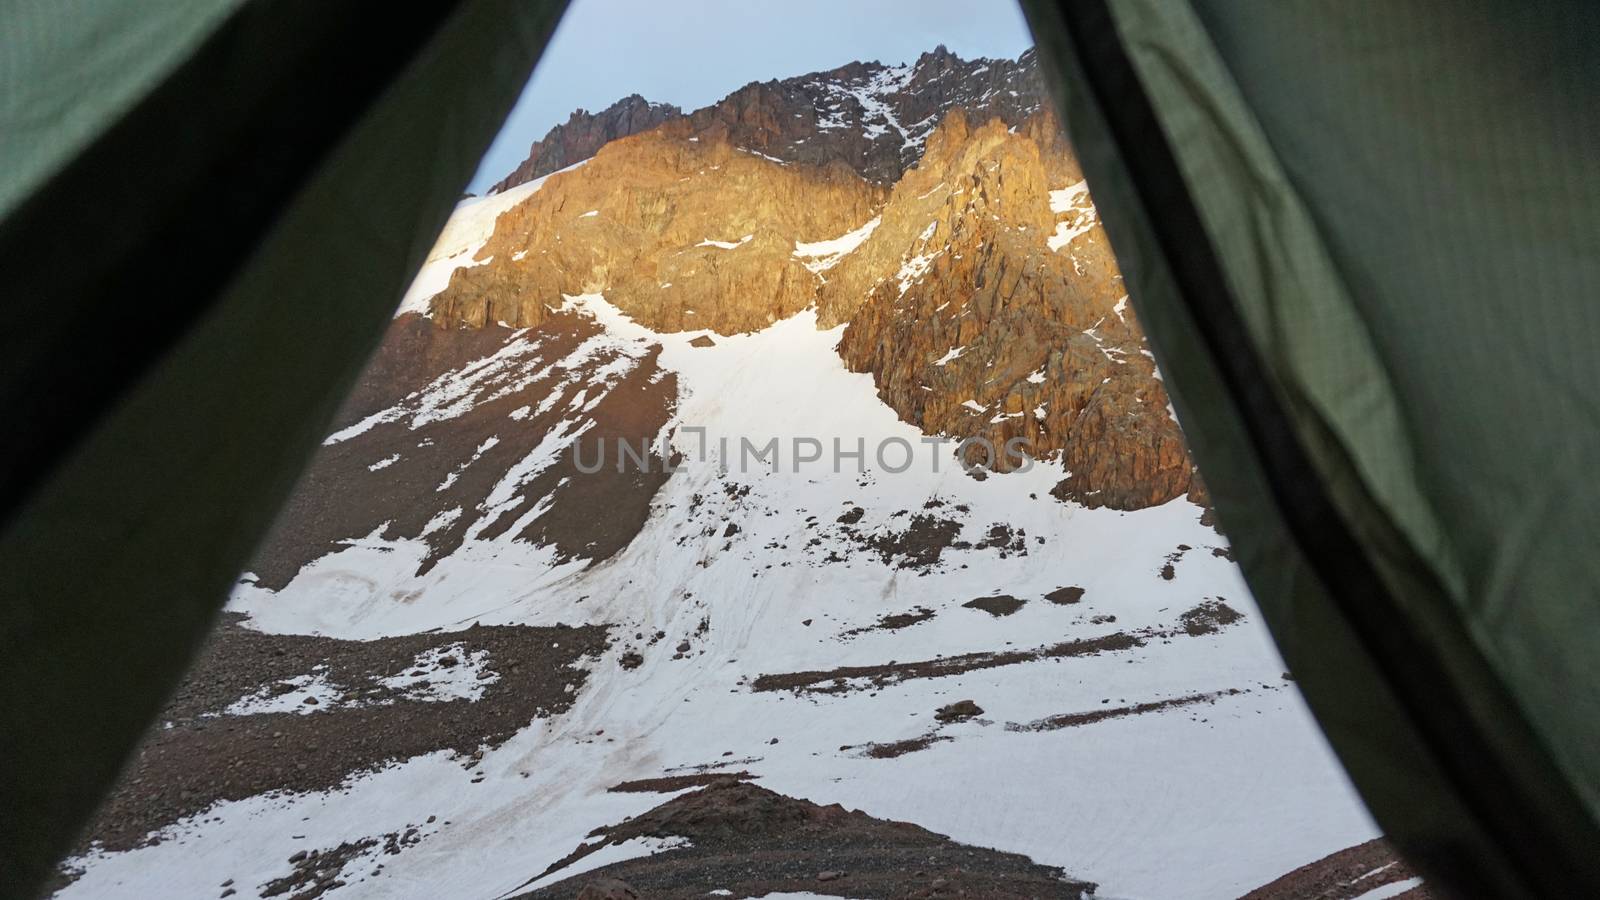 View from the tent tent on the snowy mountains. by Passcal